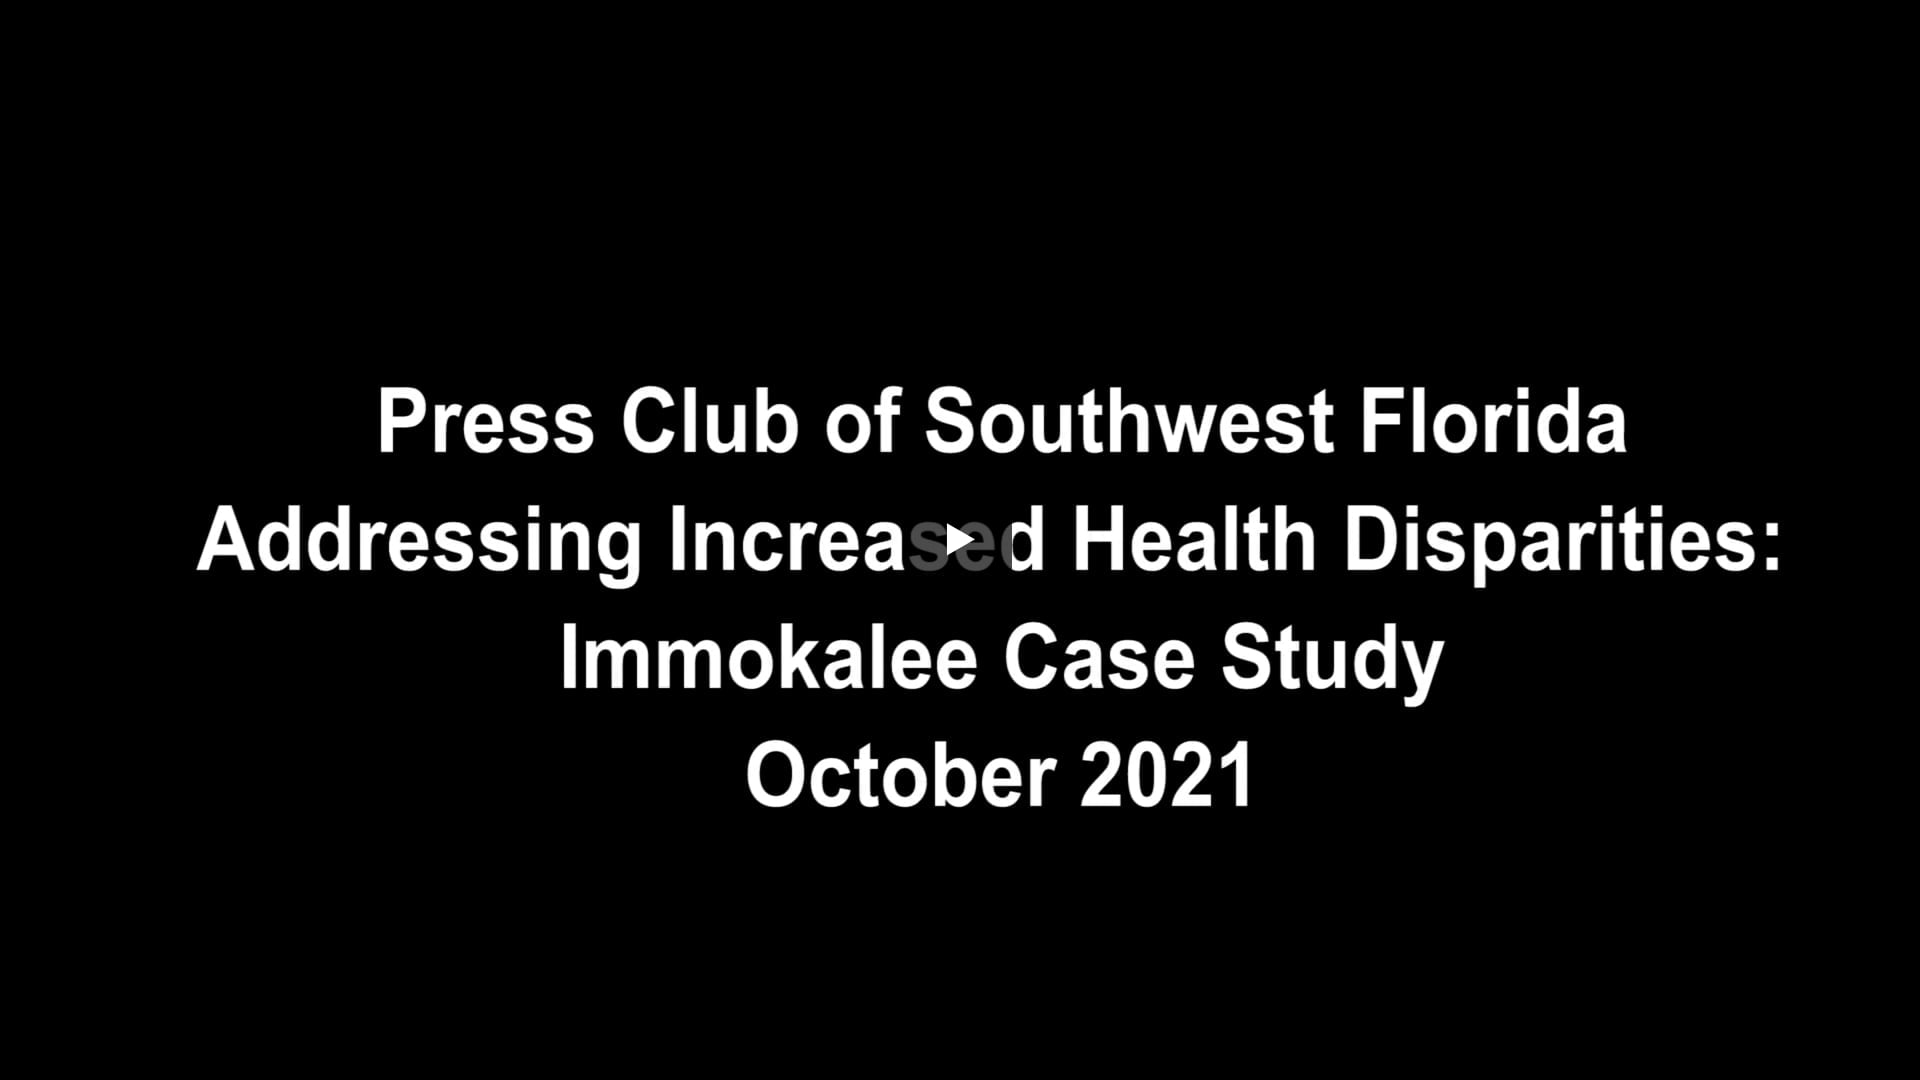 Addressing Increased Health Disparities During a Pandemic Immokalee Case Study (Clip)